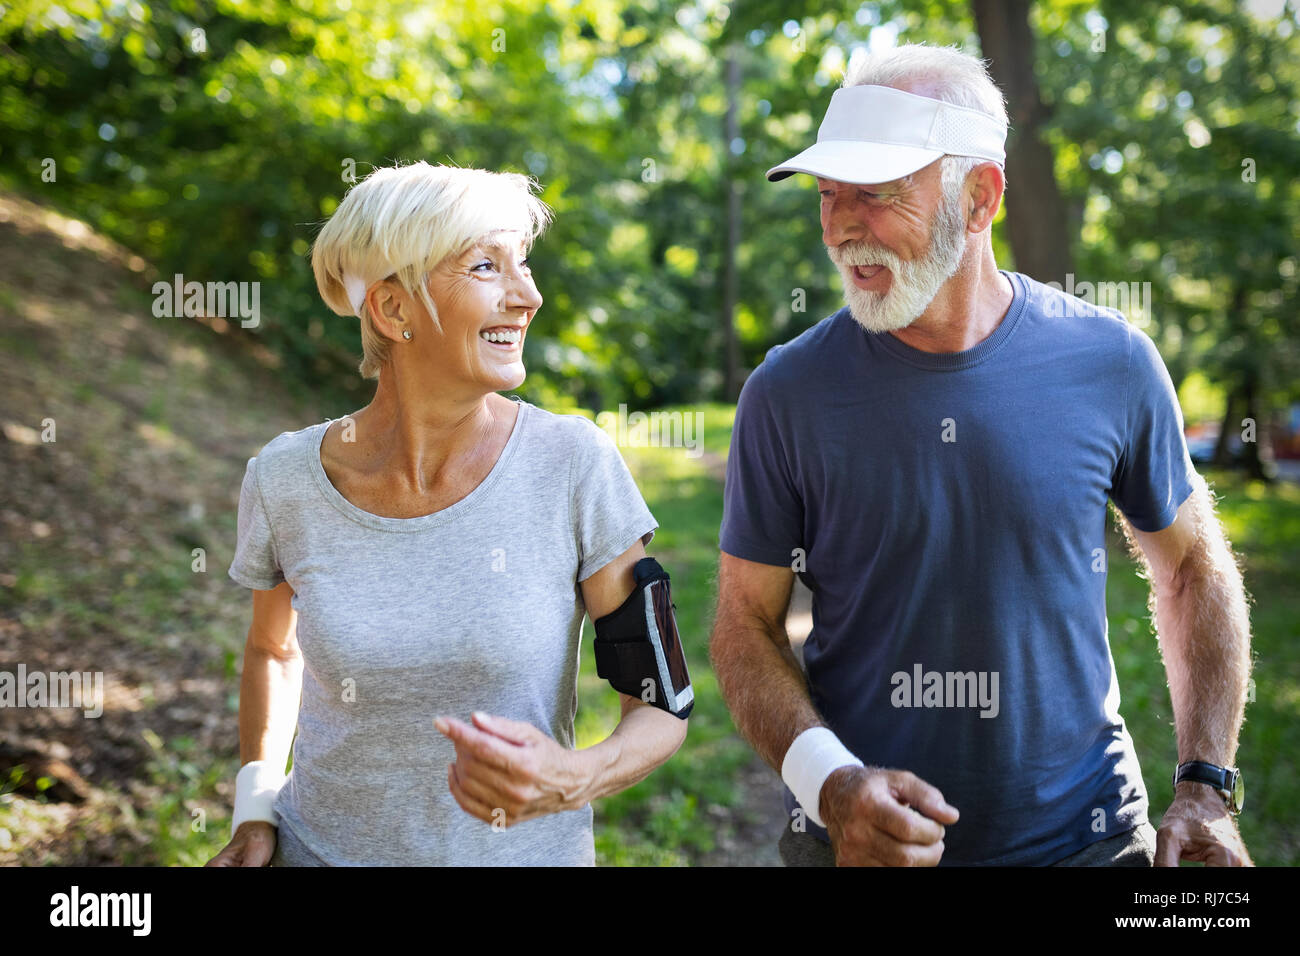 Healthy mature couple jogging in a park at early morning with sunrise Stock Photo